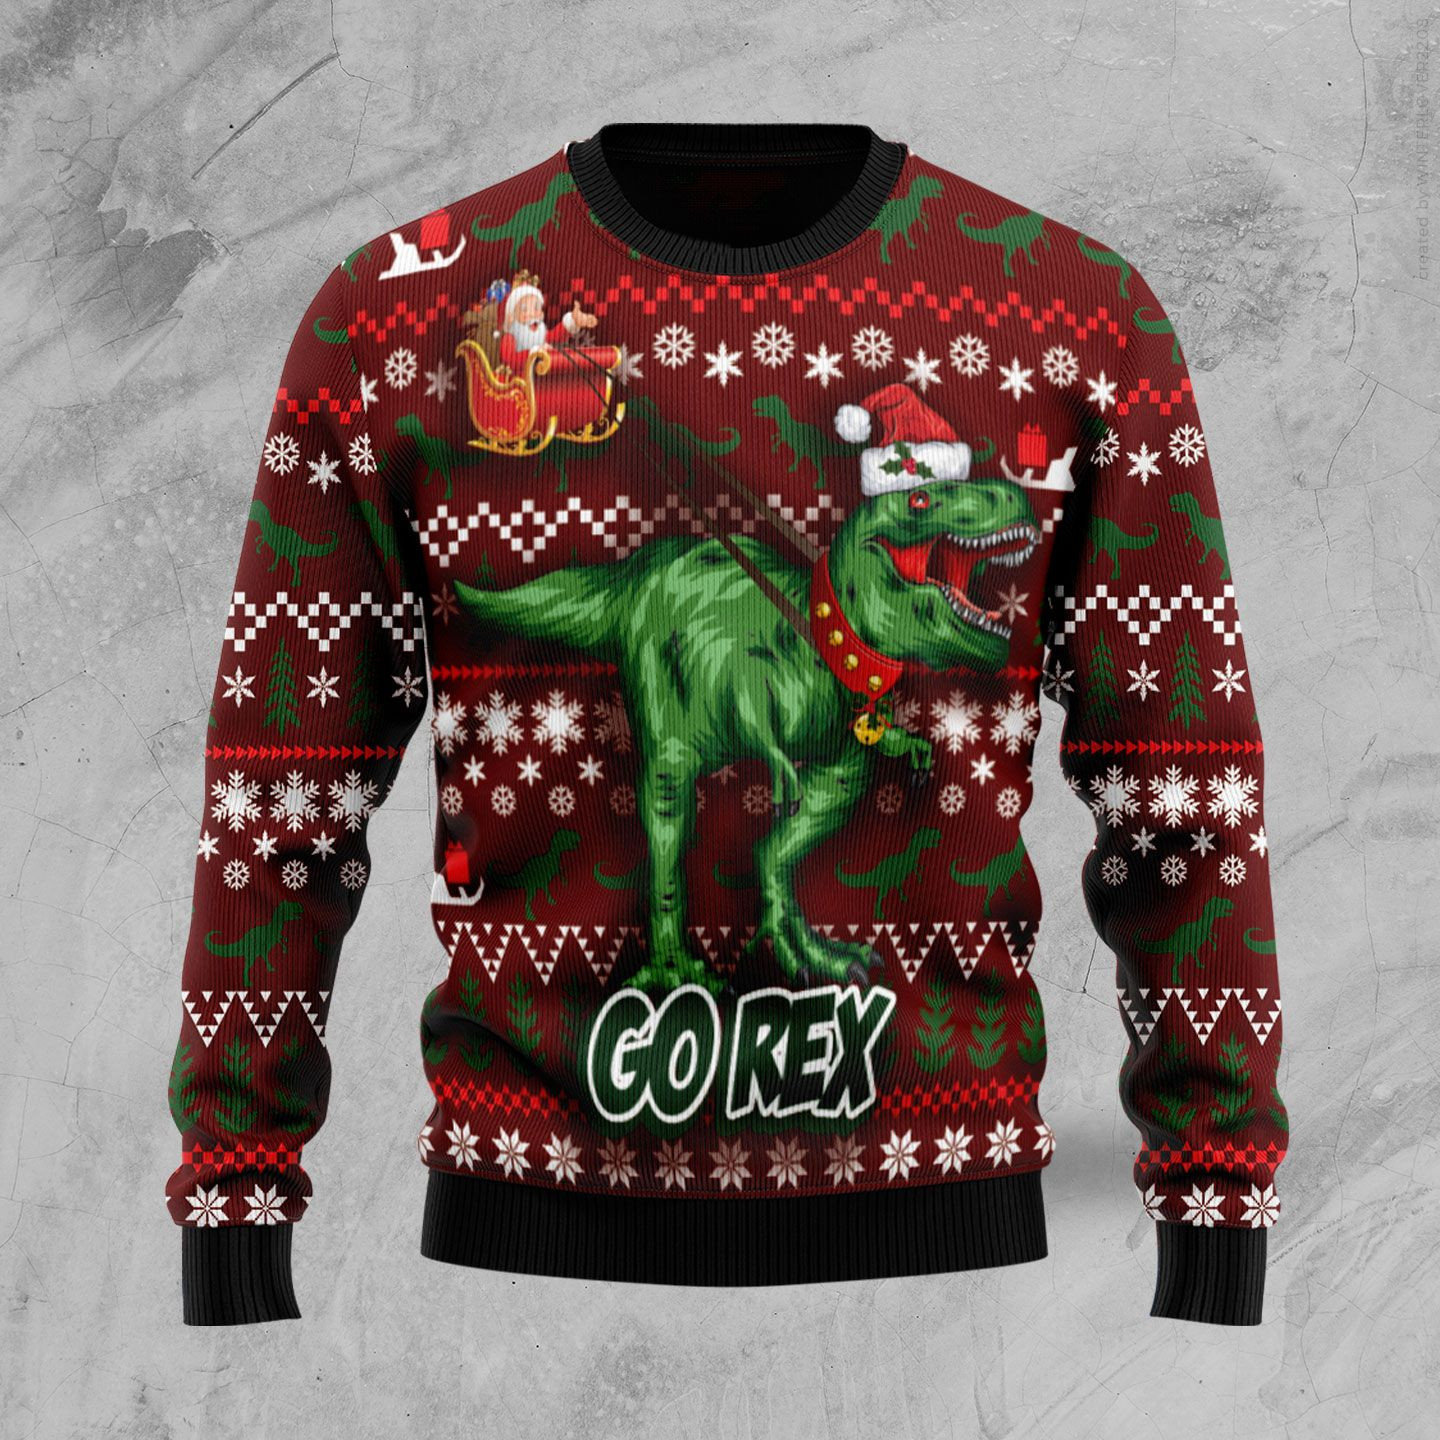 Go Rex Ugly Sweater